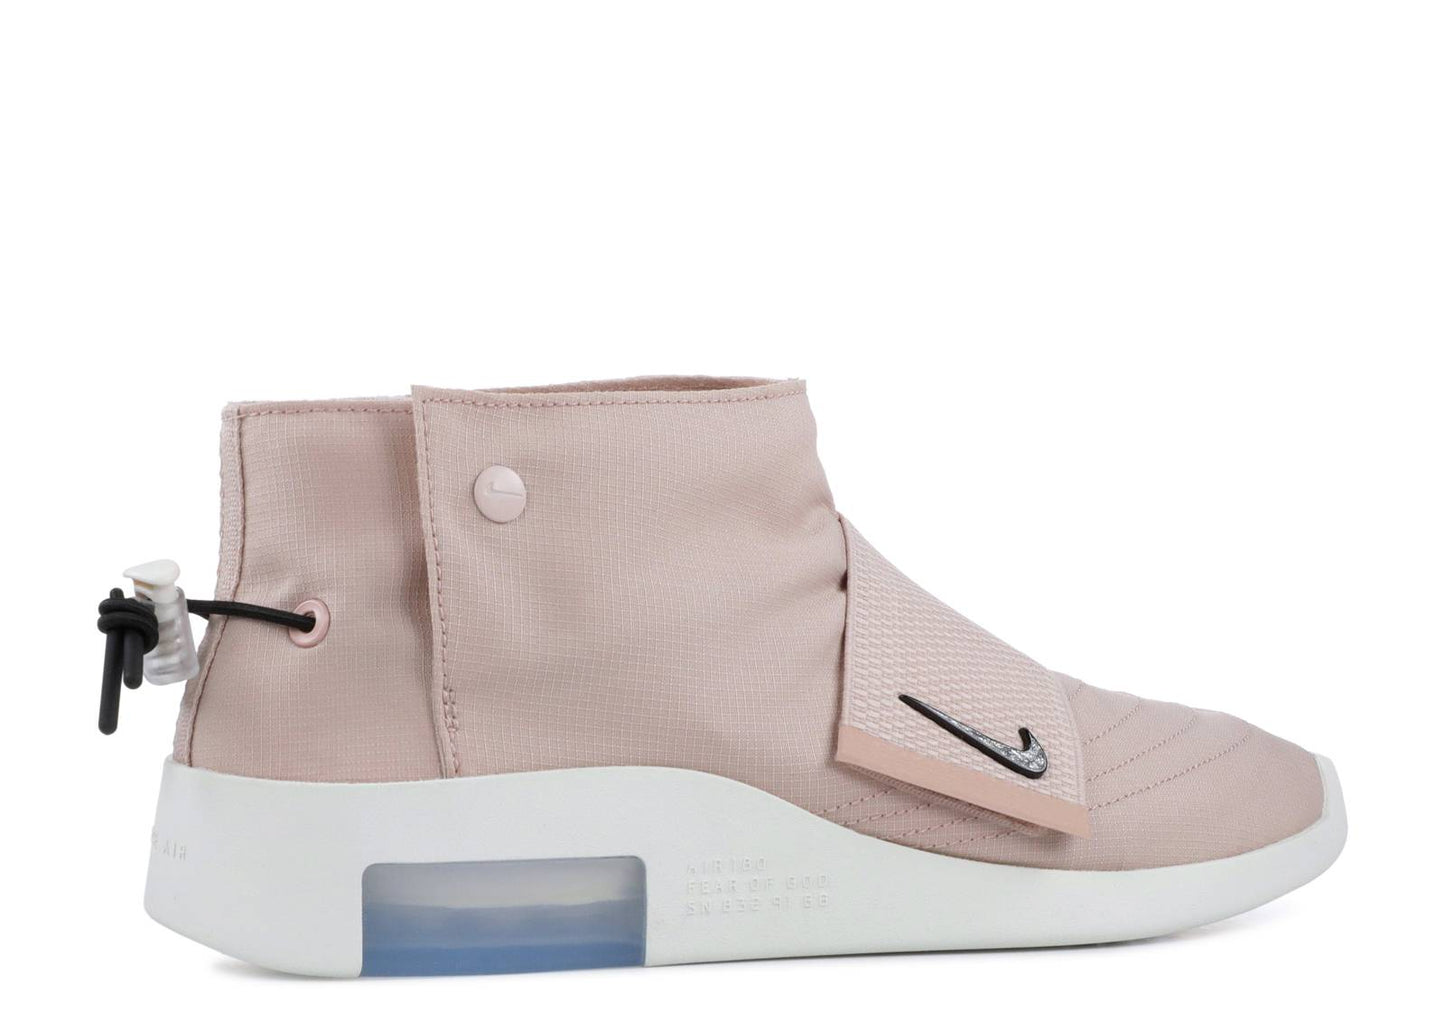 Nike Air Fear Of God Moccasin "Particle Beige"